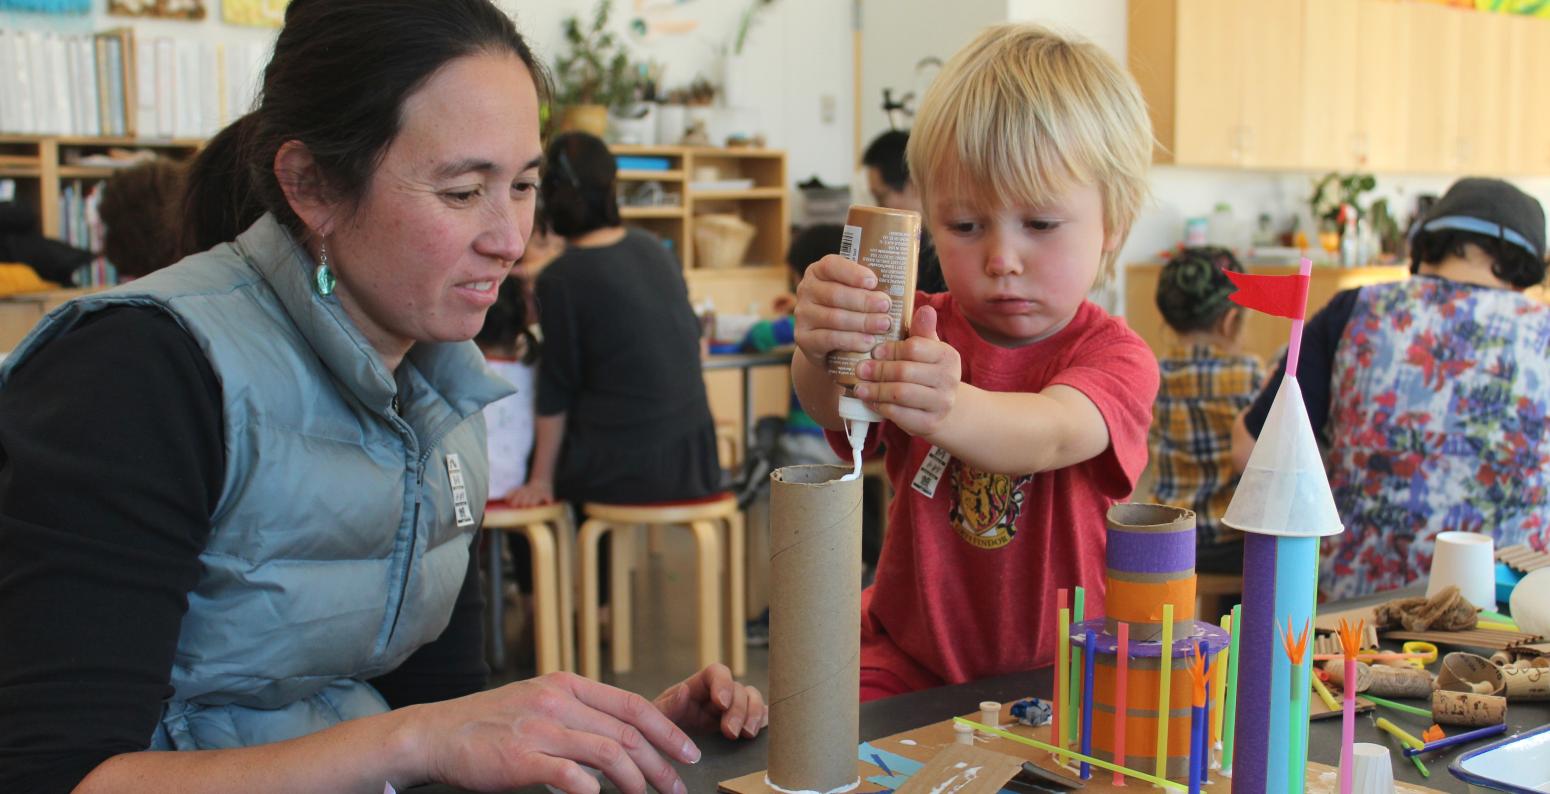 An adult and child work together to build a sculpture out of cardboard, glue, straws, and cups.